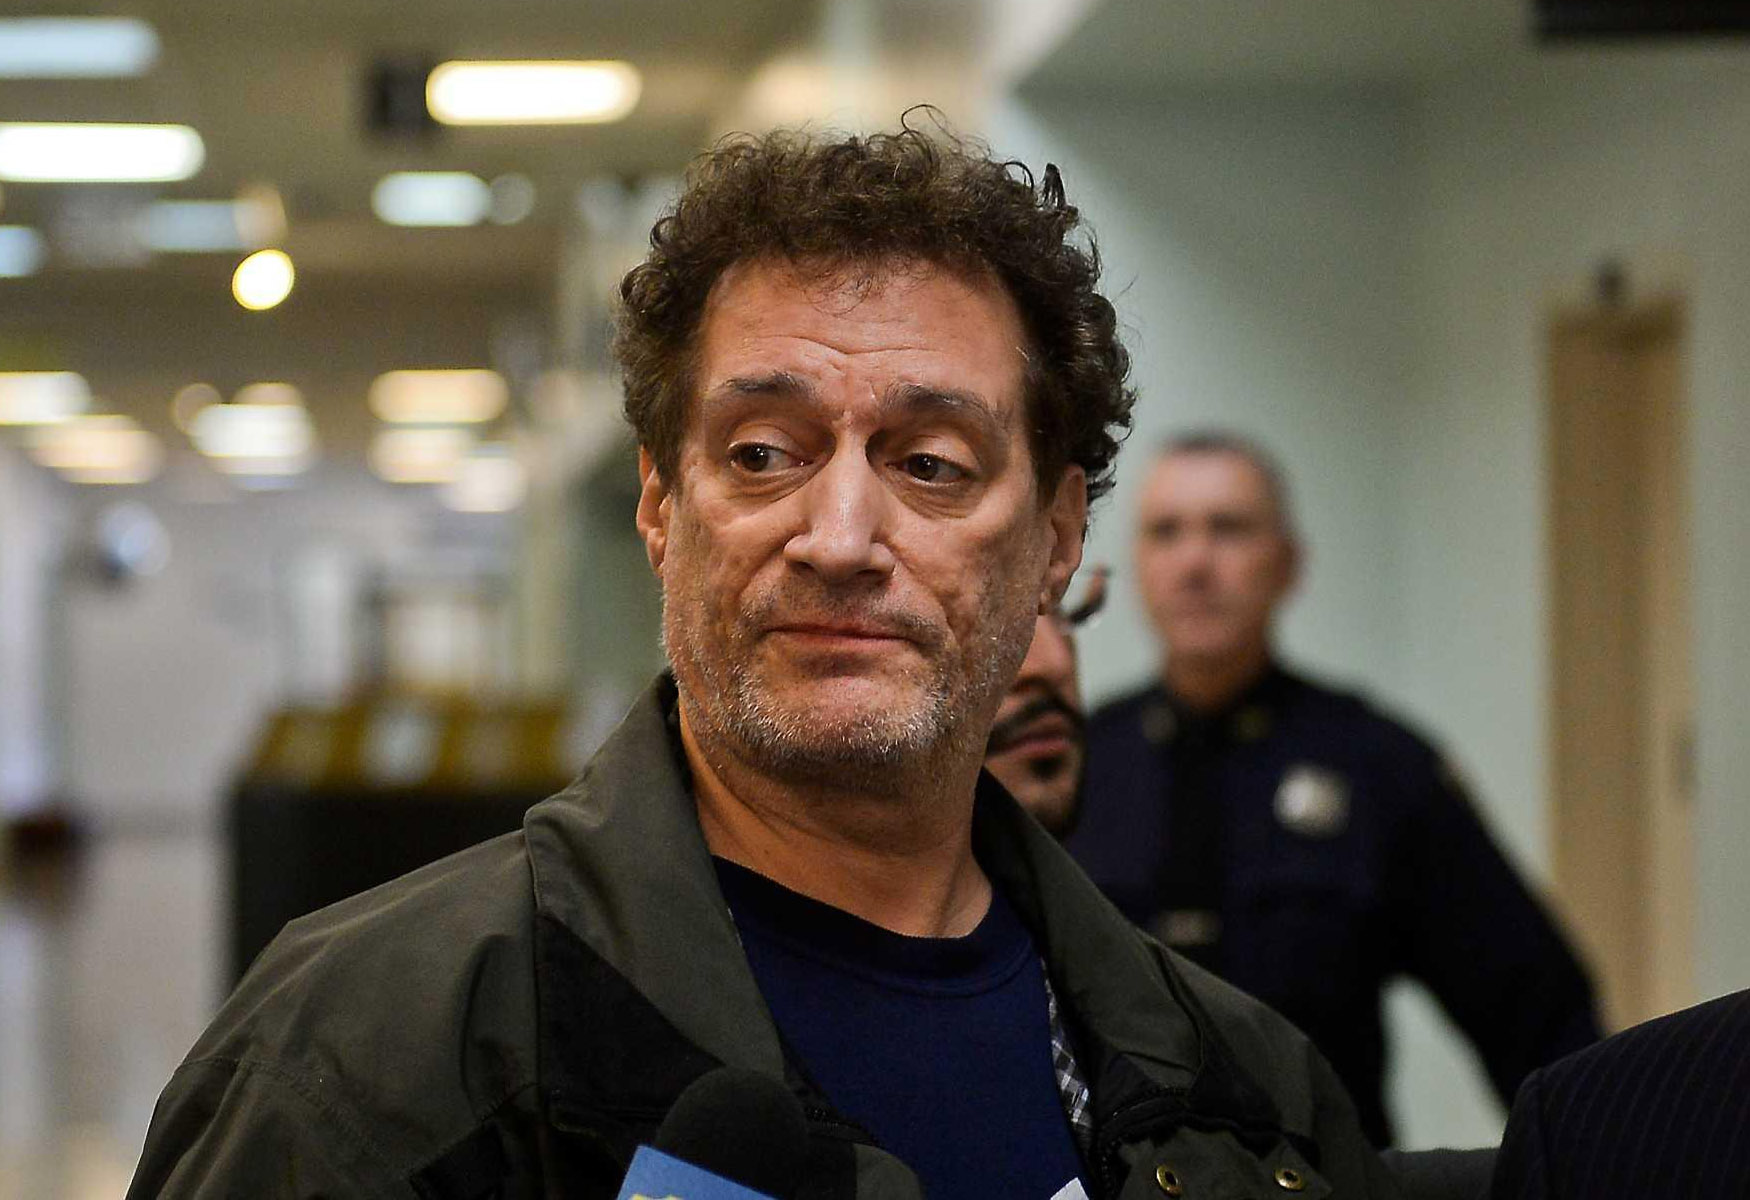 21-astounding-facts-about-anthony-cumia